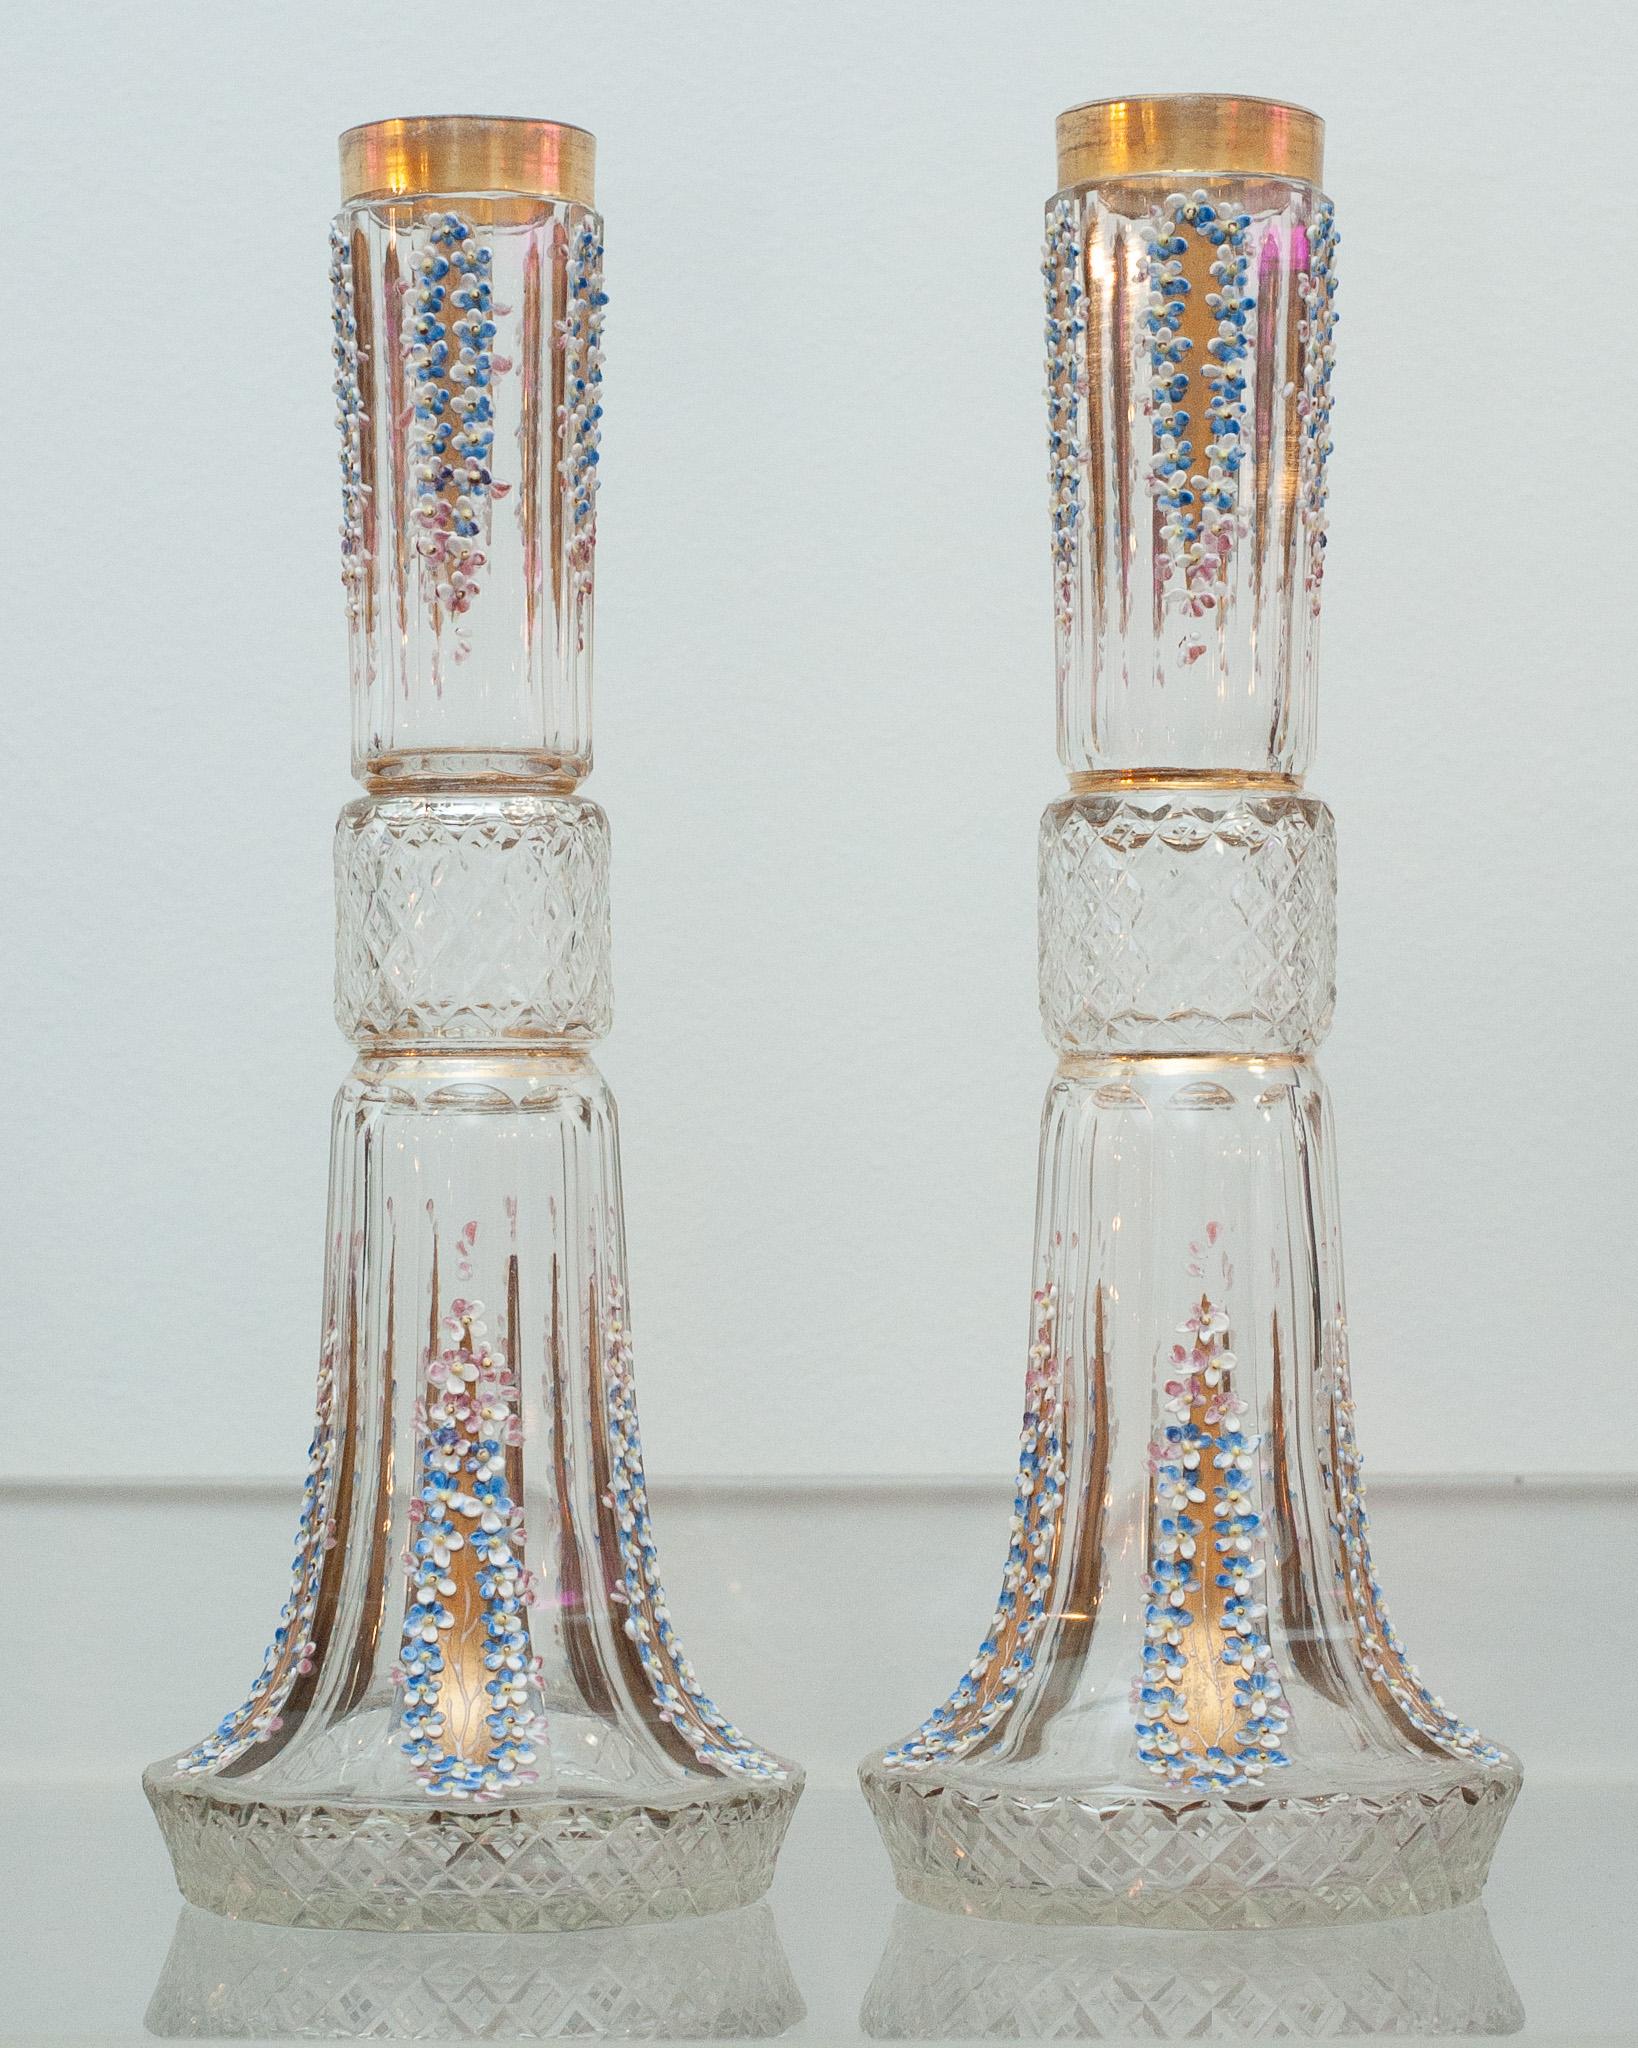 An elegant pair of antique hand painted floral and cut crystal vases with gilded detail. 